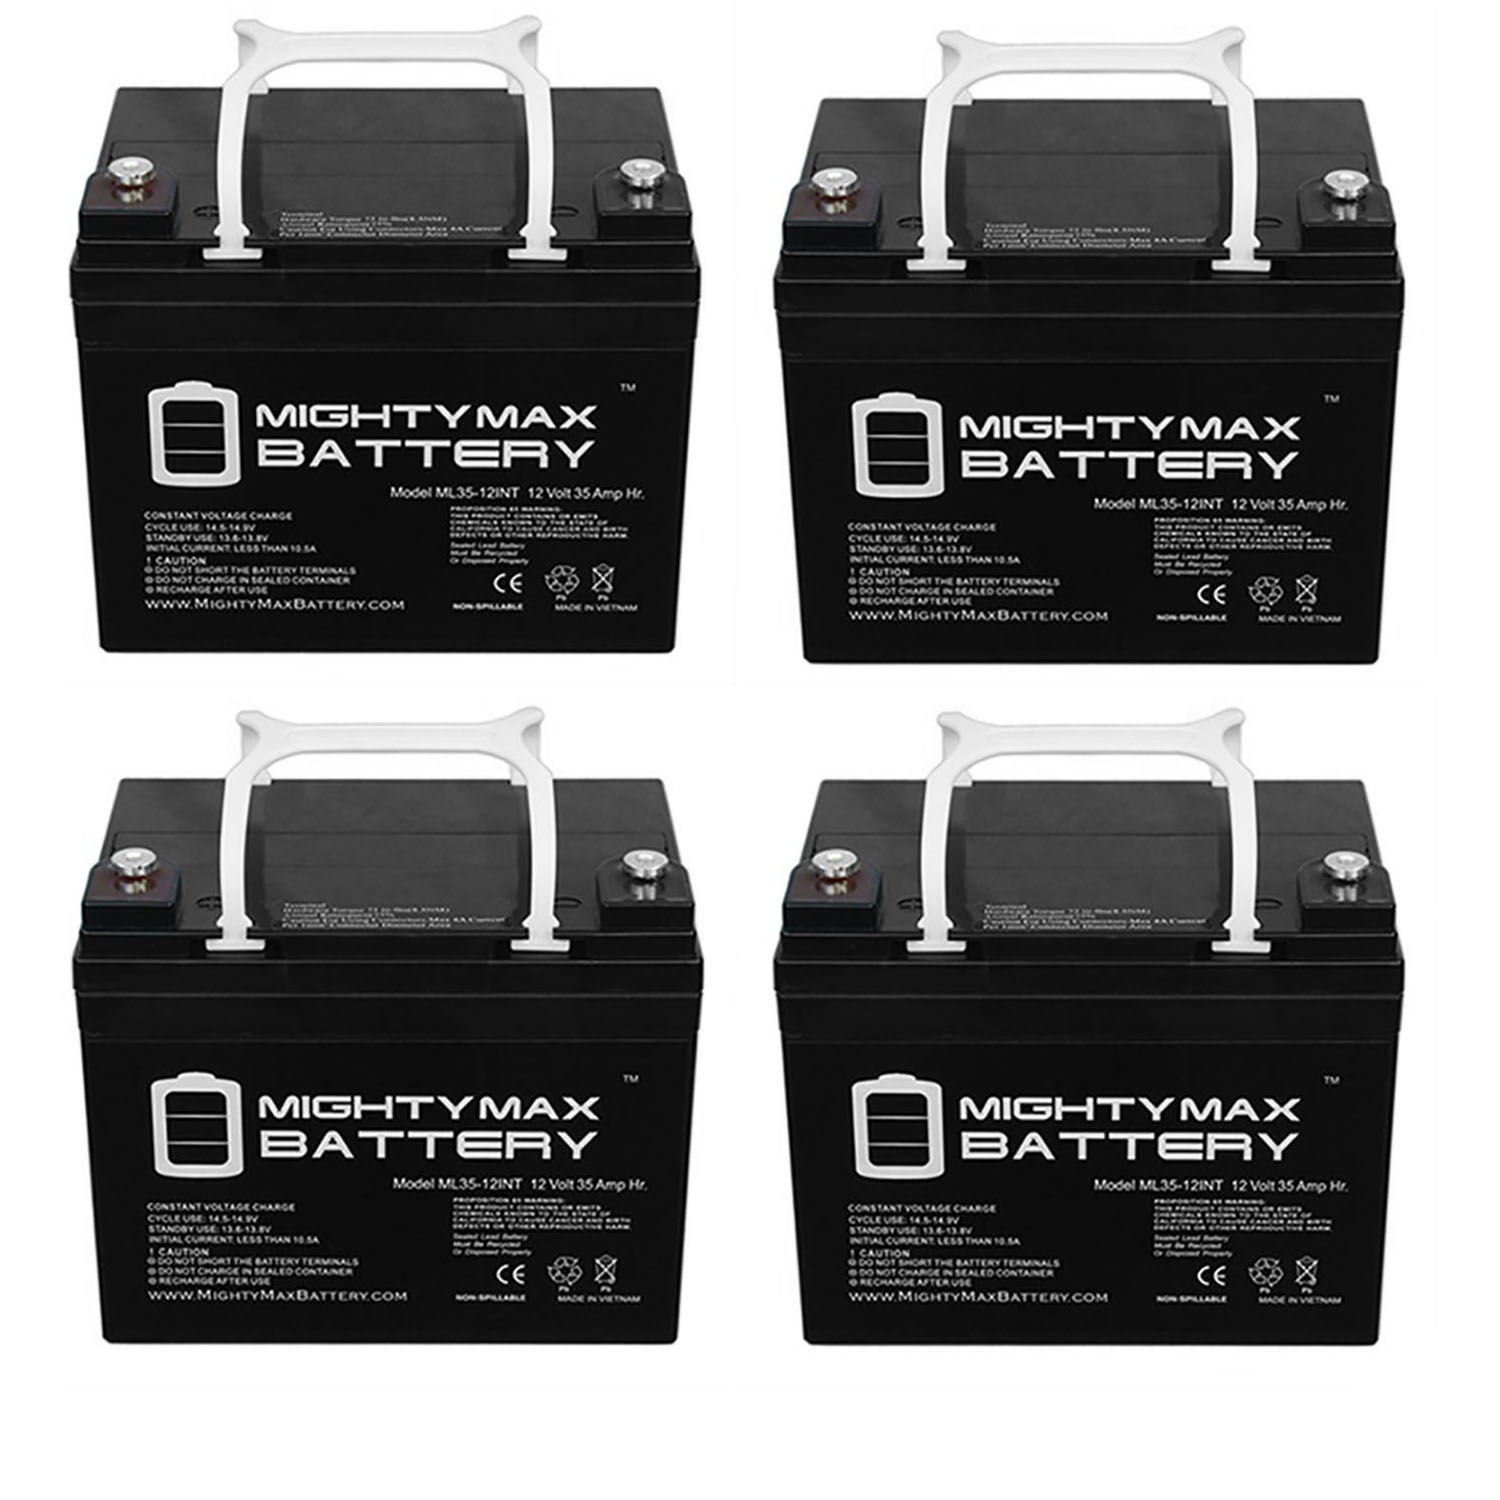 12V 35AH INT Replacement Battery for Rascal 300 - 4 Pack